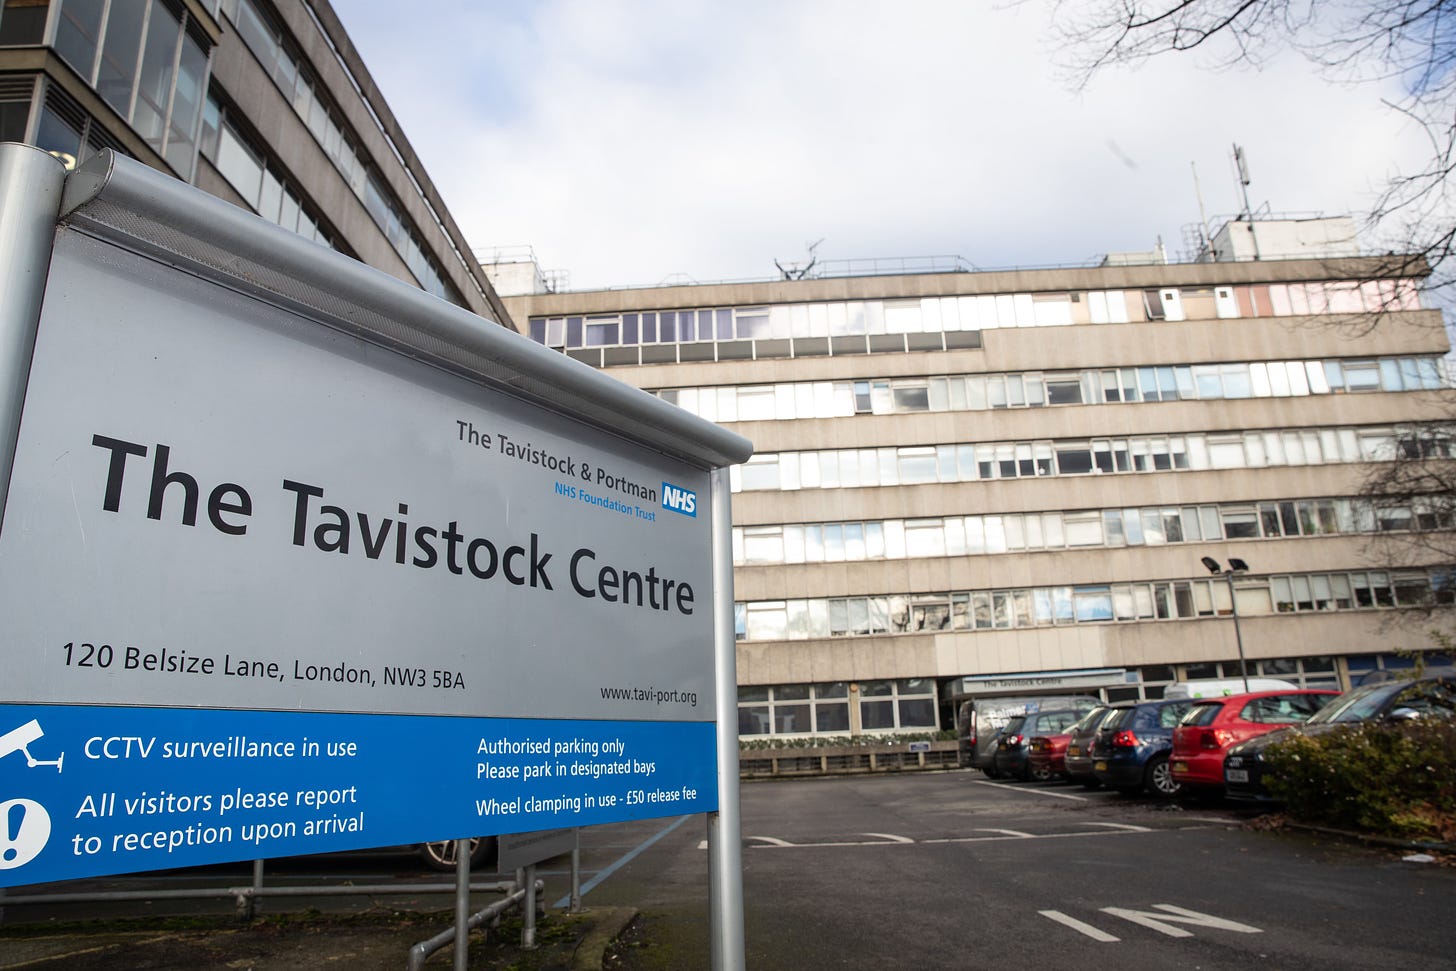 Tavistock gender clinic facing legal action over 'failure of care' claims |  The Independent